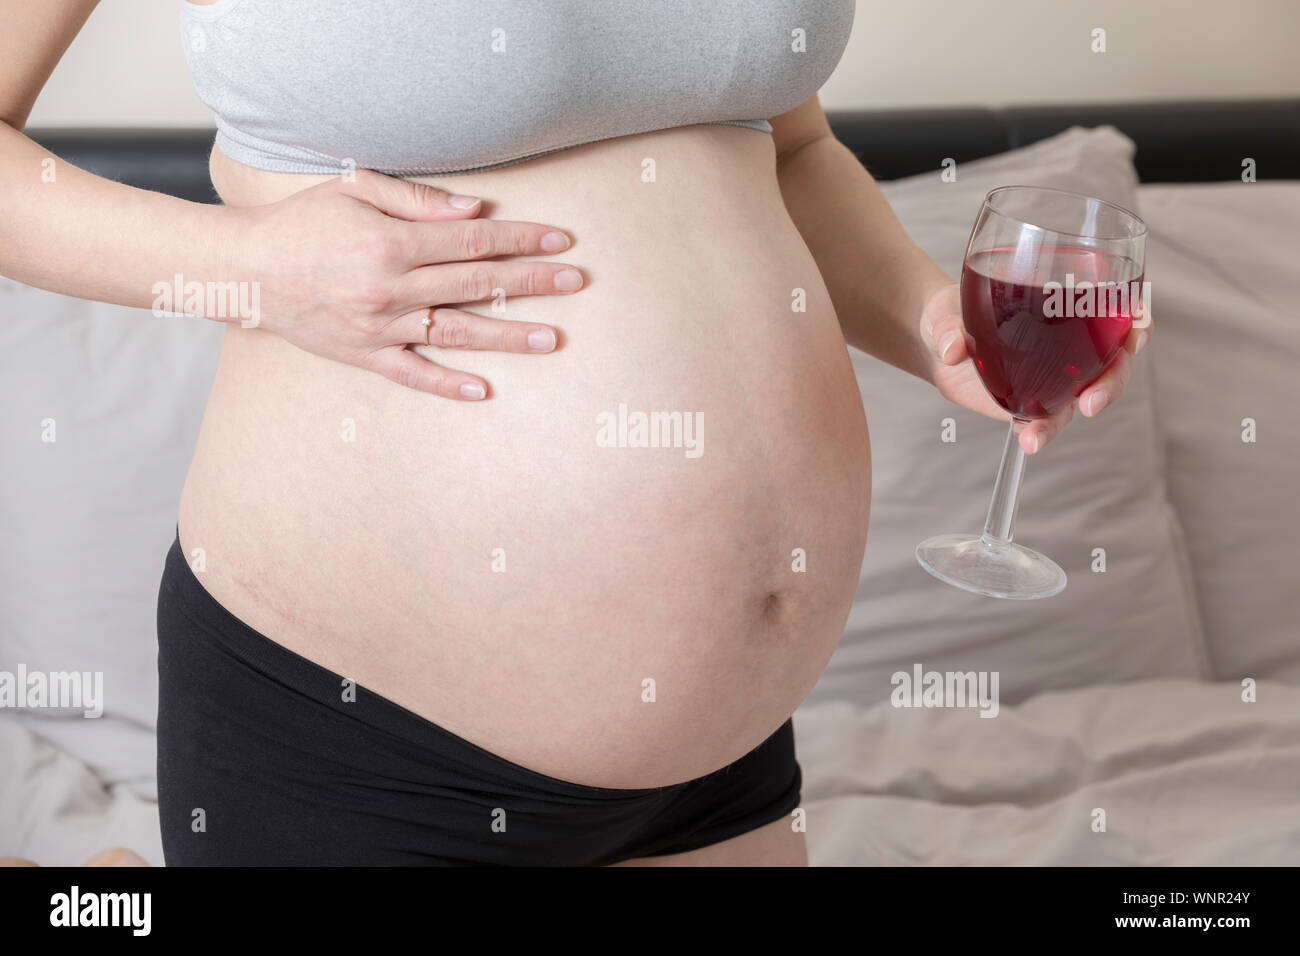 Pregnant Woman Drinking Alcohol, Girl in Pregnancy Holding Glass of Wine Stock Photo